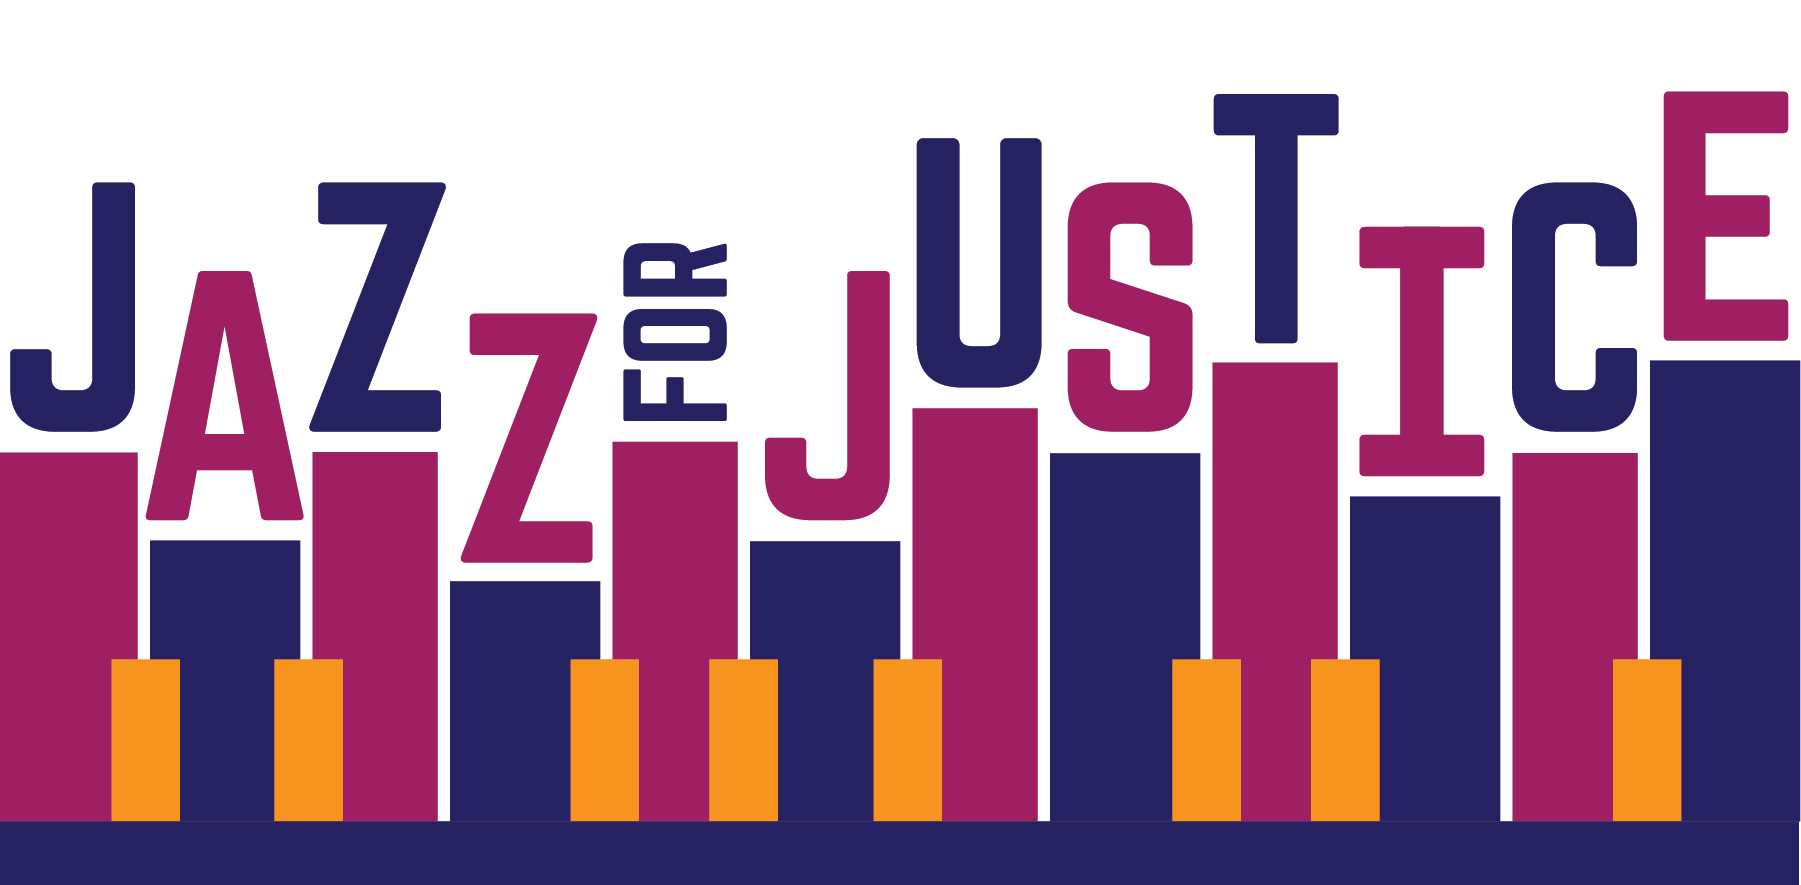 01-11-19A 2019JazzforJustice-graphic-300dpi